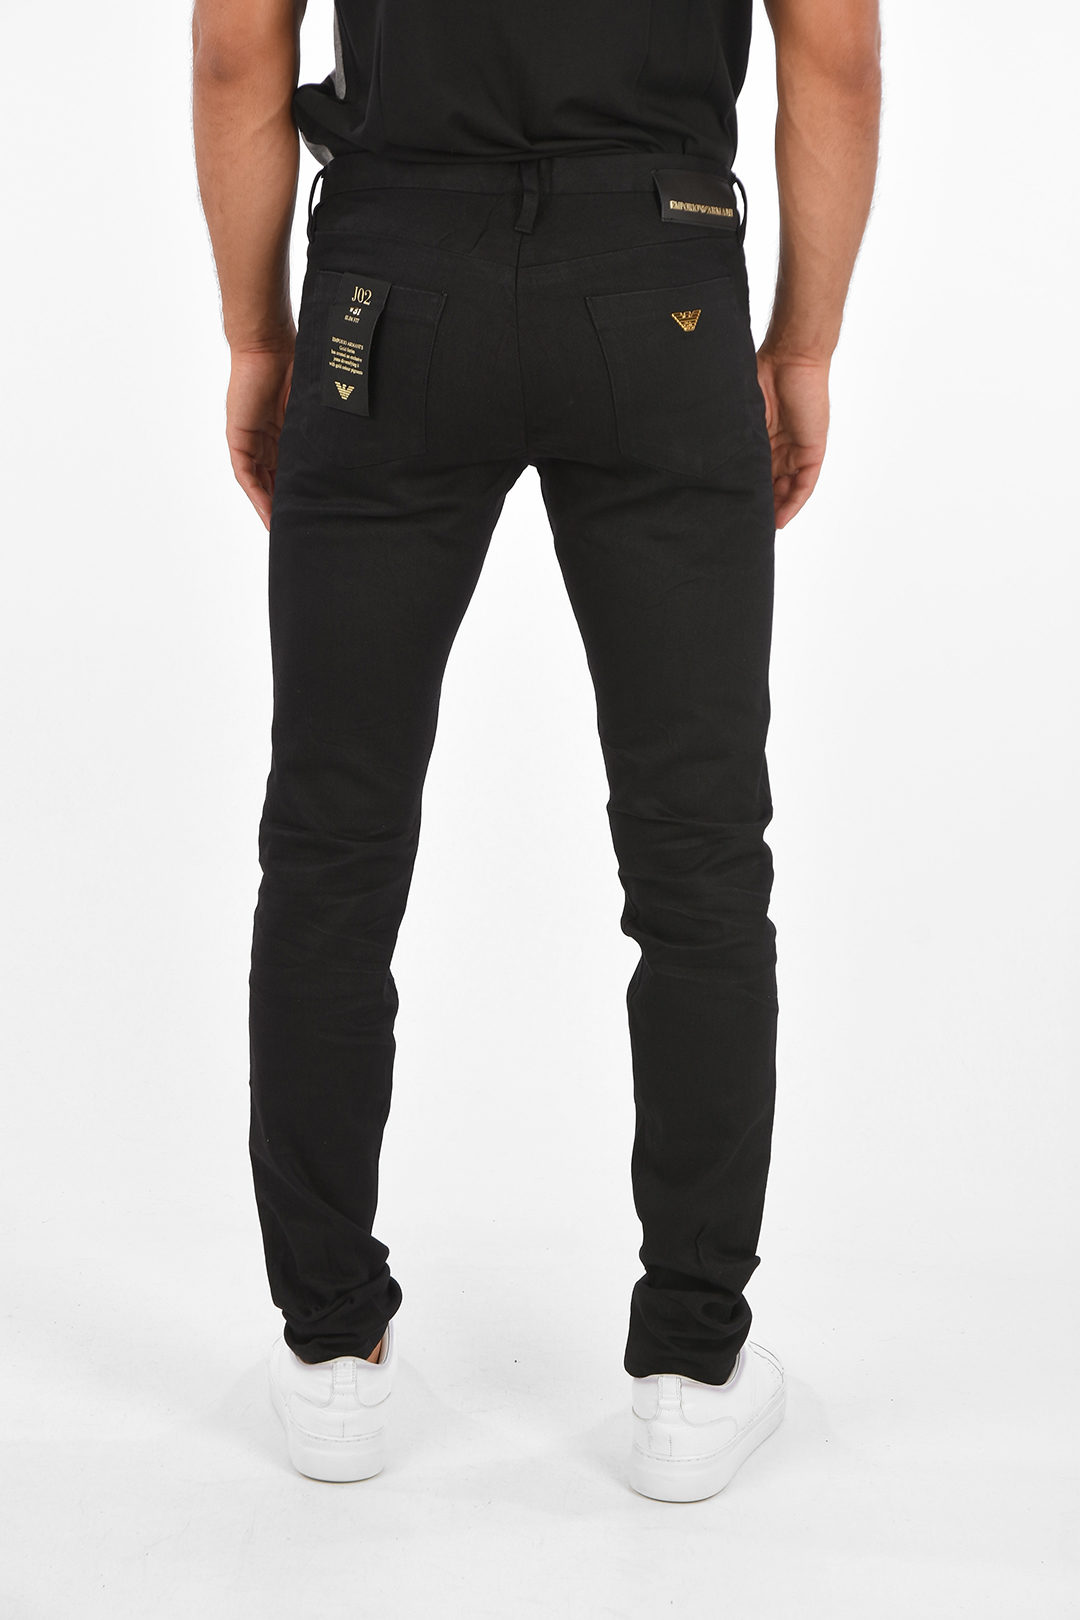 Armani EMPORIO GOLD SERIES slim fit J02 jeans - Glamood Outlet